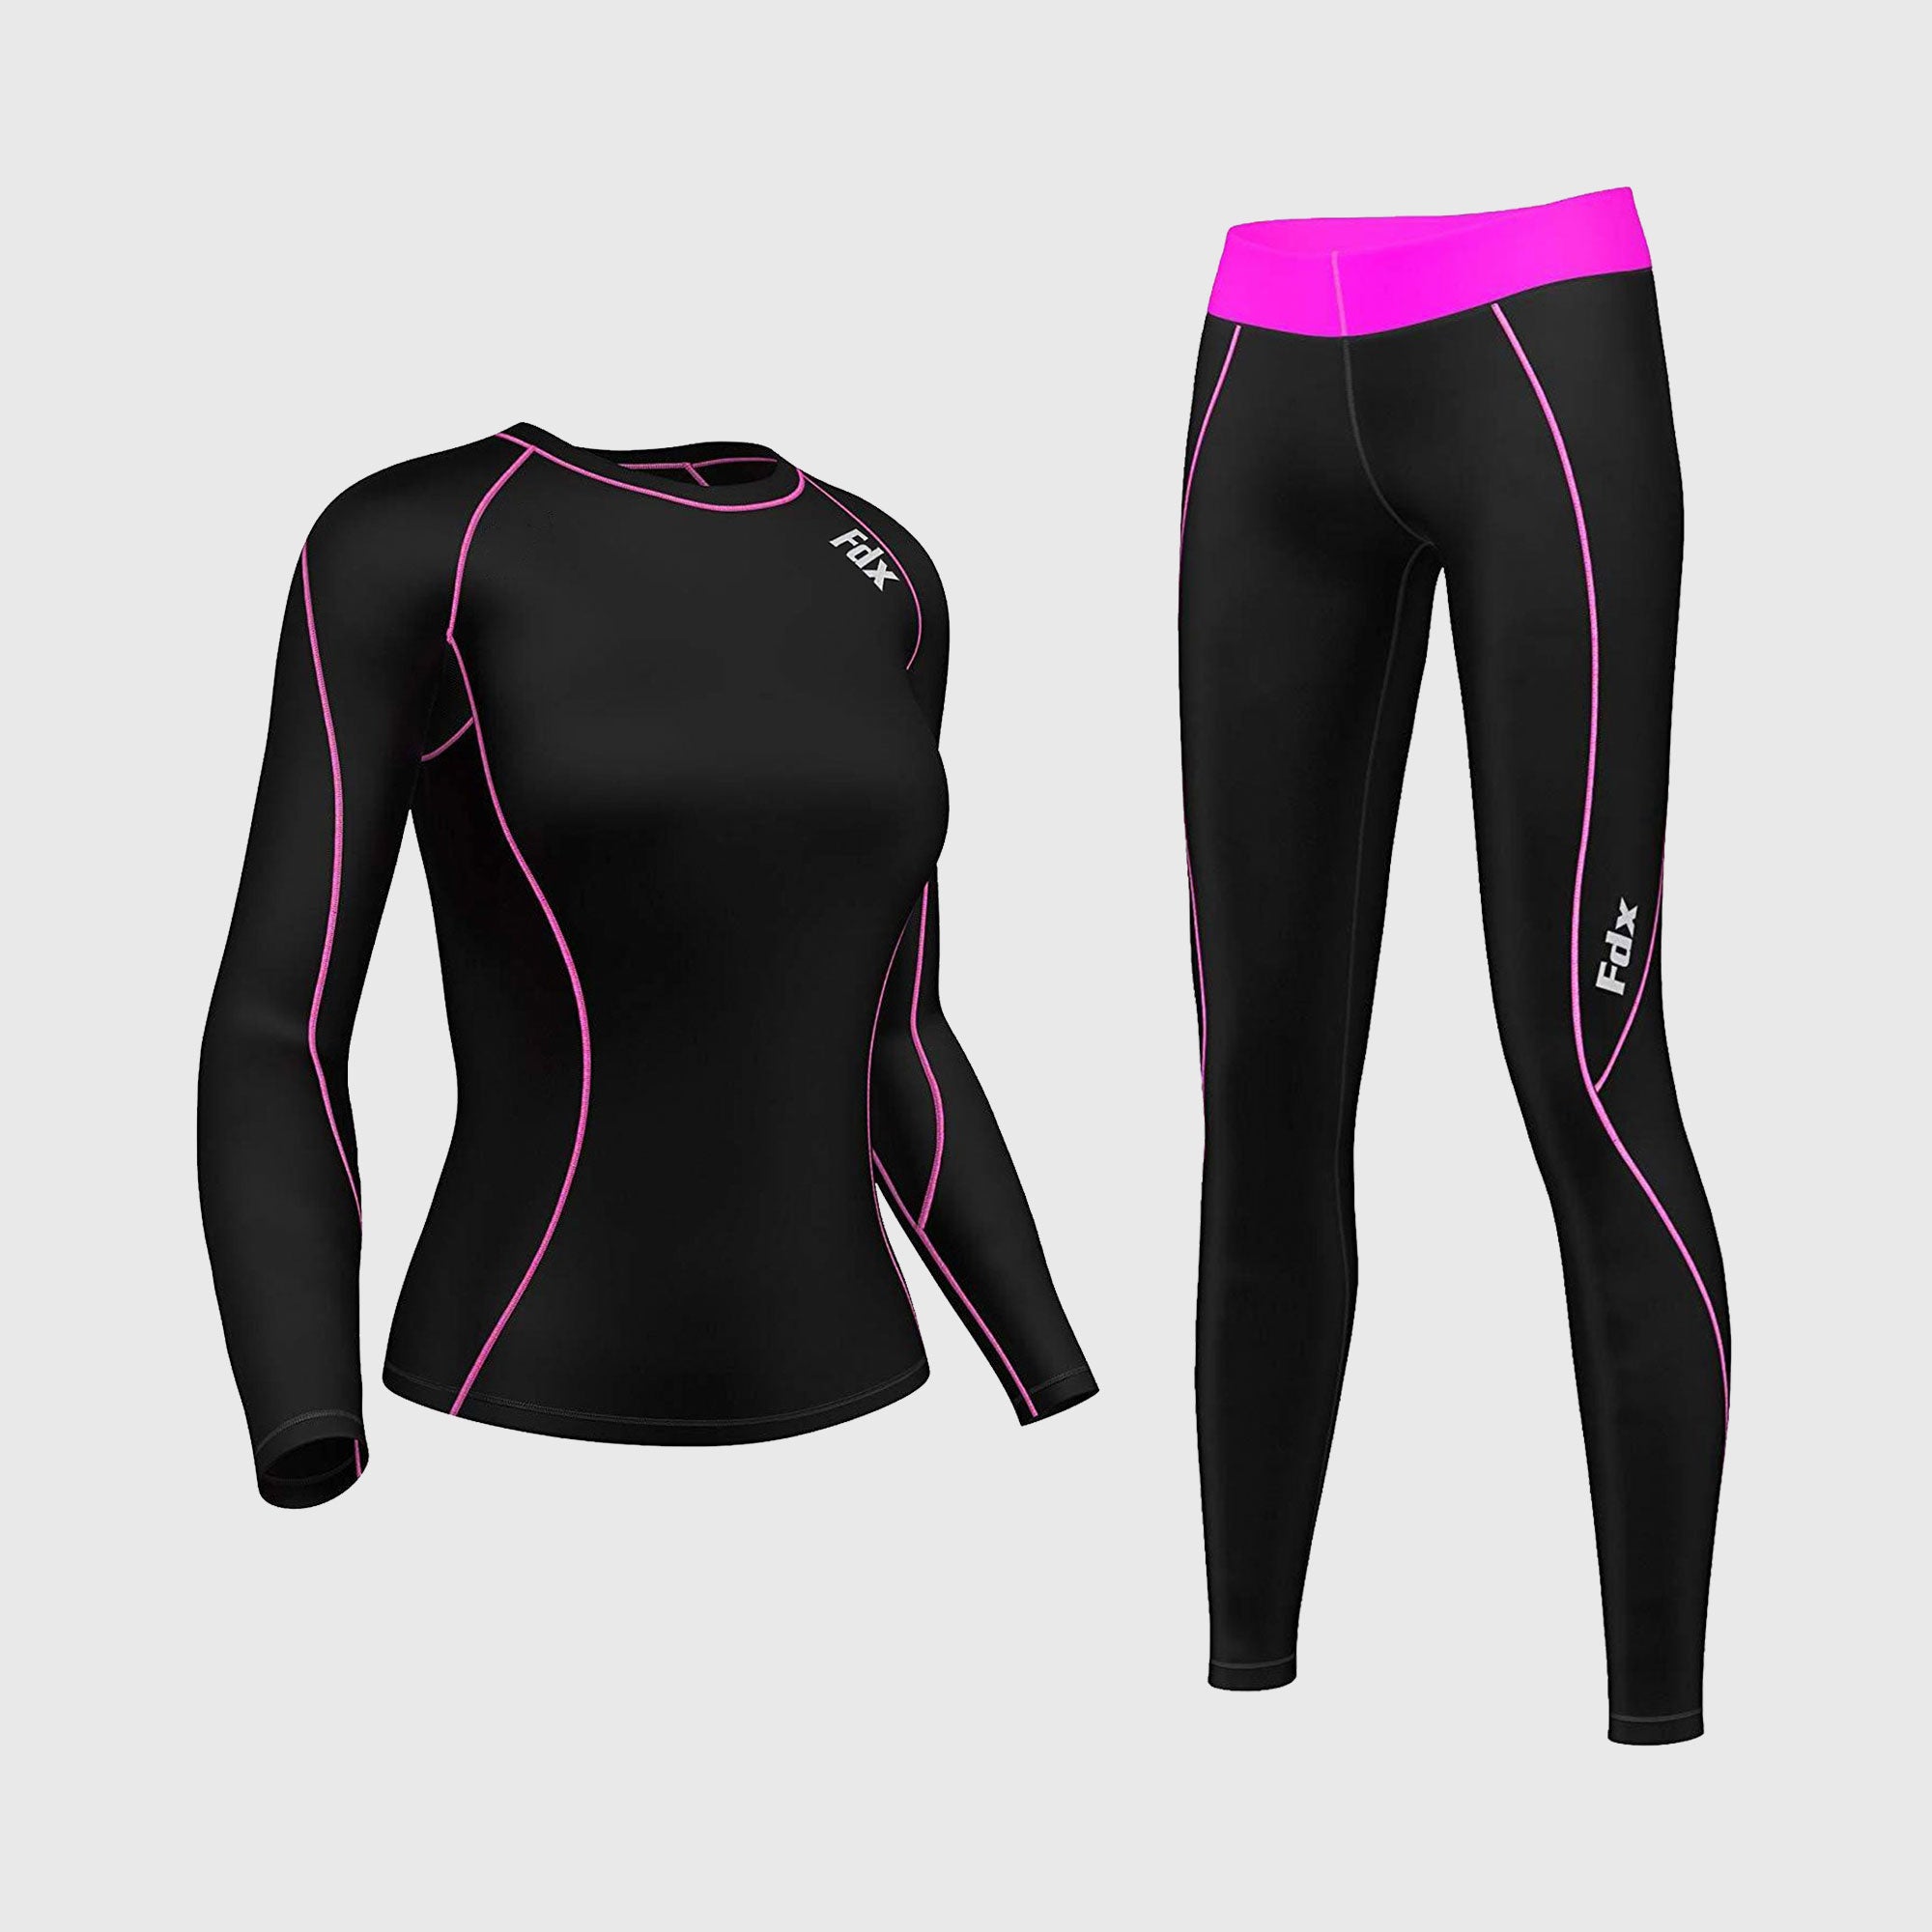 Buy Fdx Women's Set Long Sleeve Compression Cycling Tops